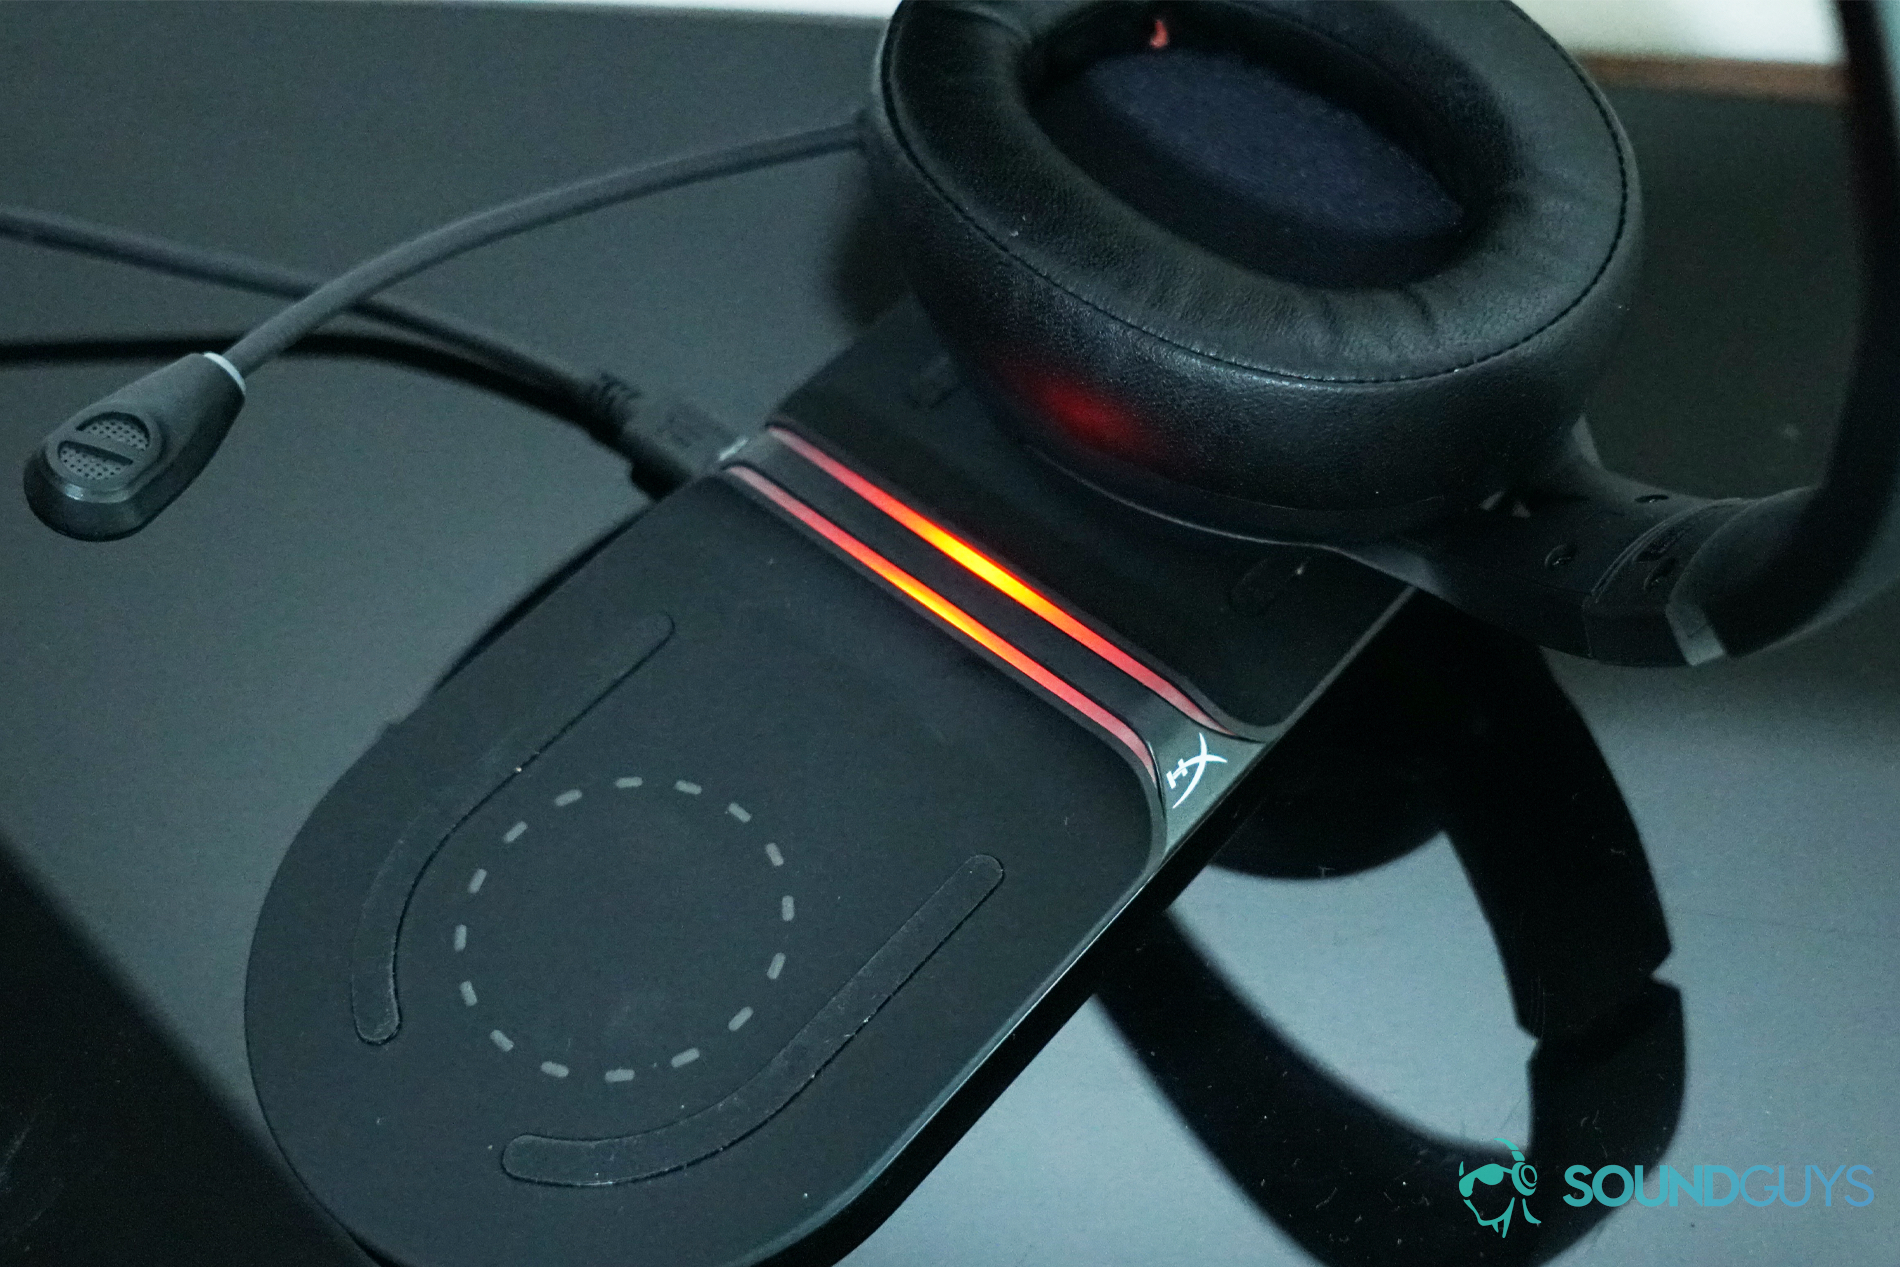 The HyperX Cloud Flight S sits on the HyperX Qi-compatible wireless charging base.